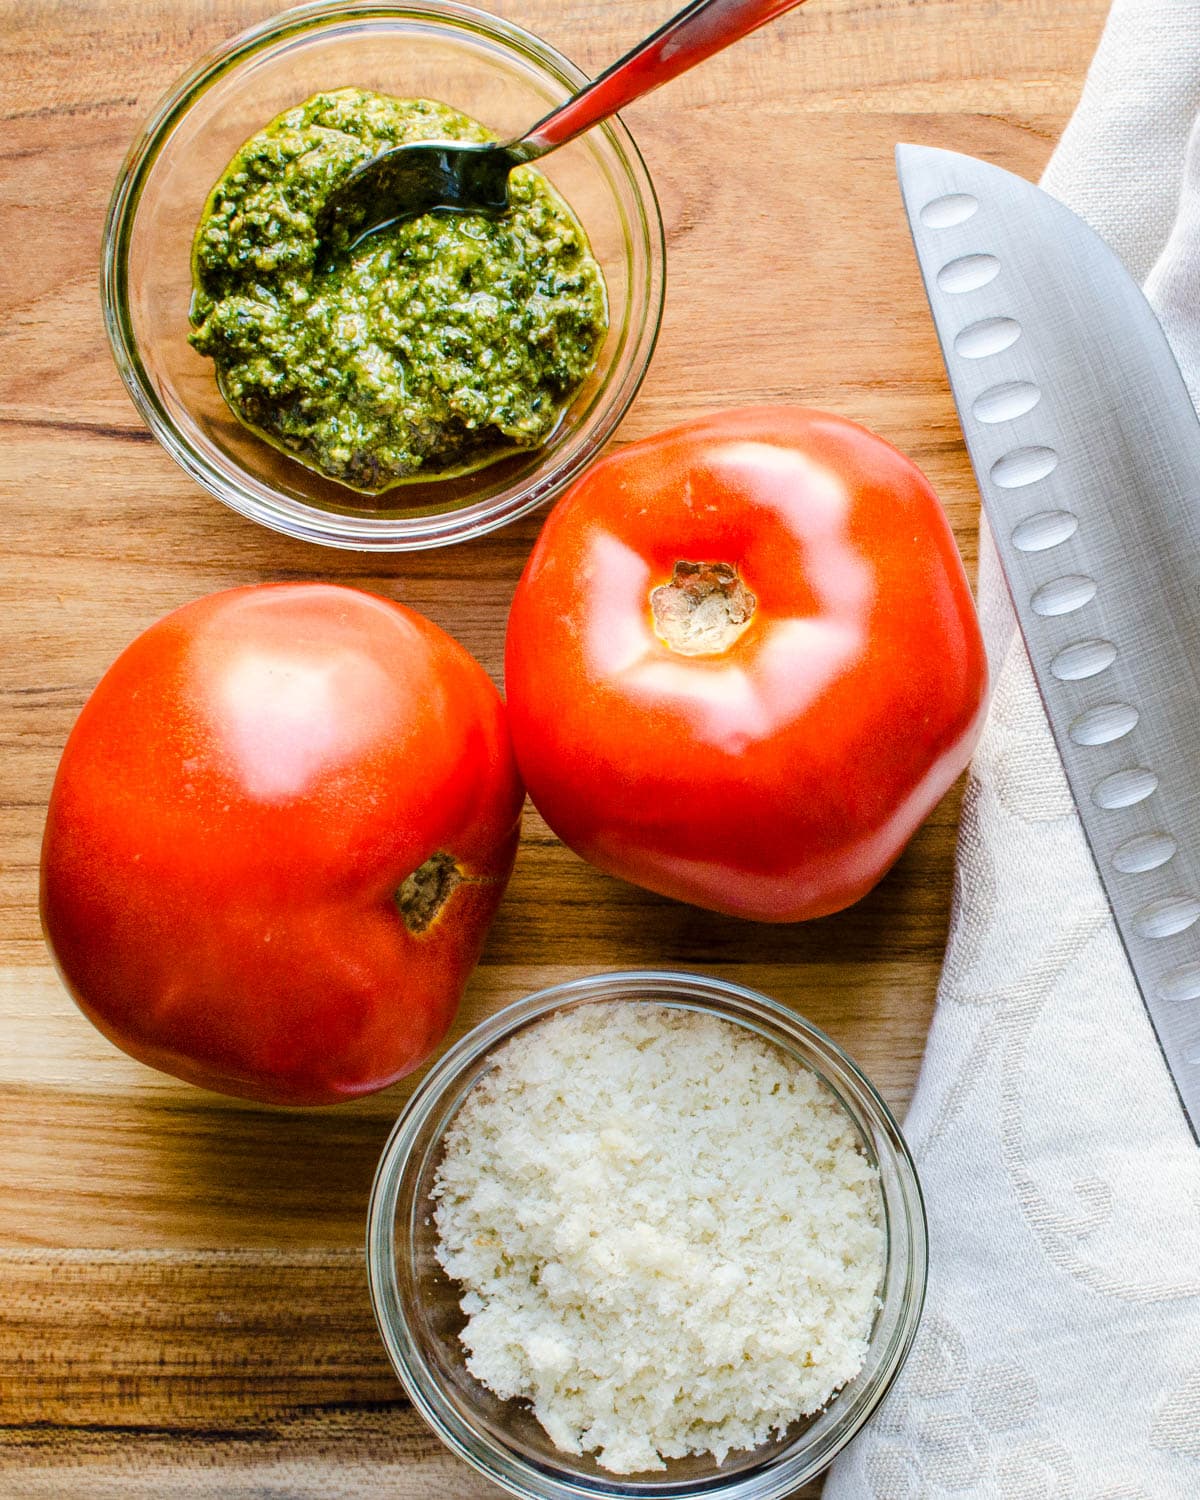 Large beefsteak tomatoes on a cutting board with pesto sauce and breadcrumbs.